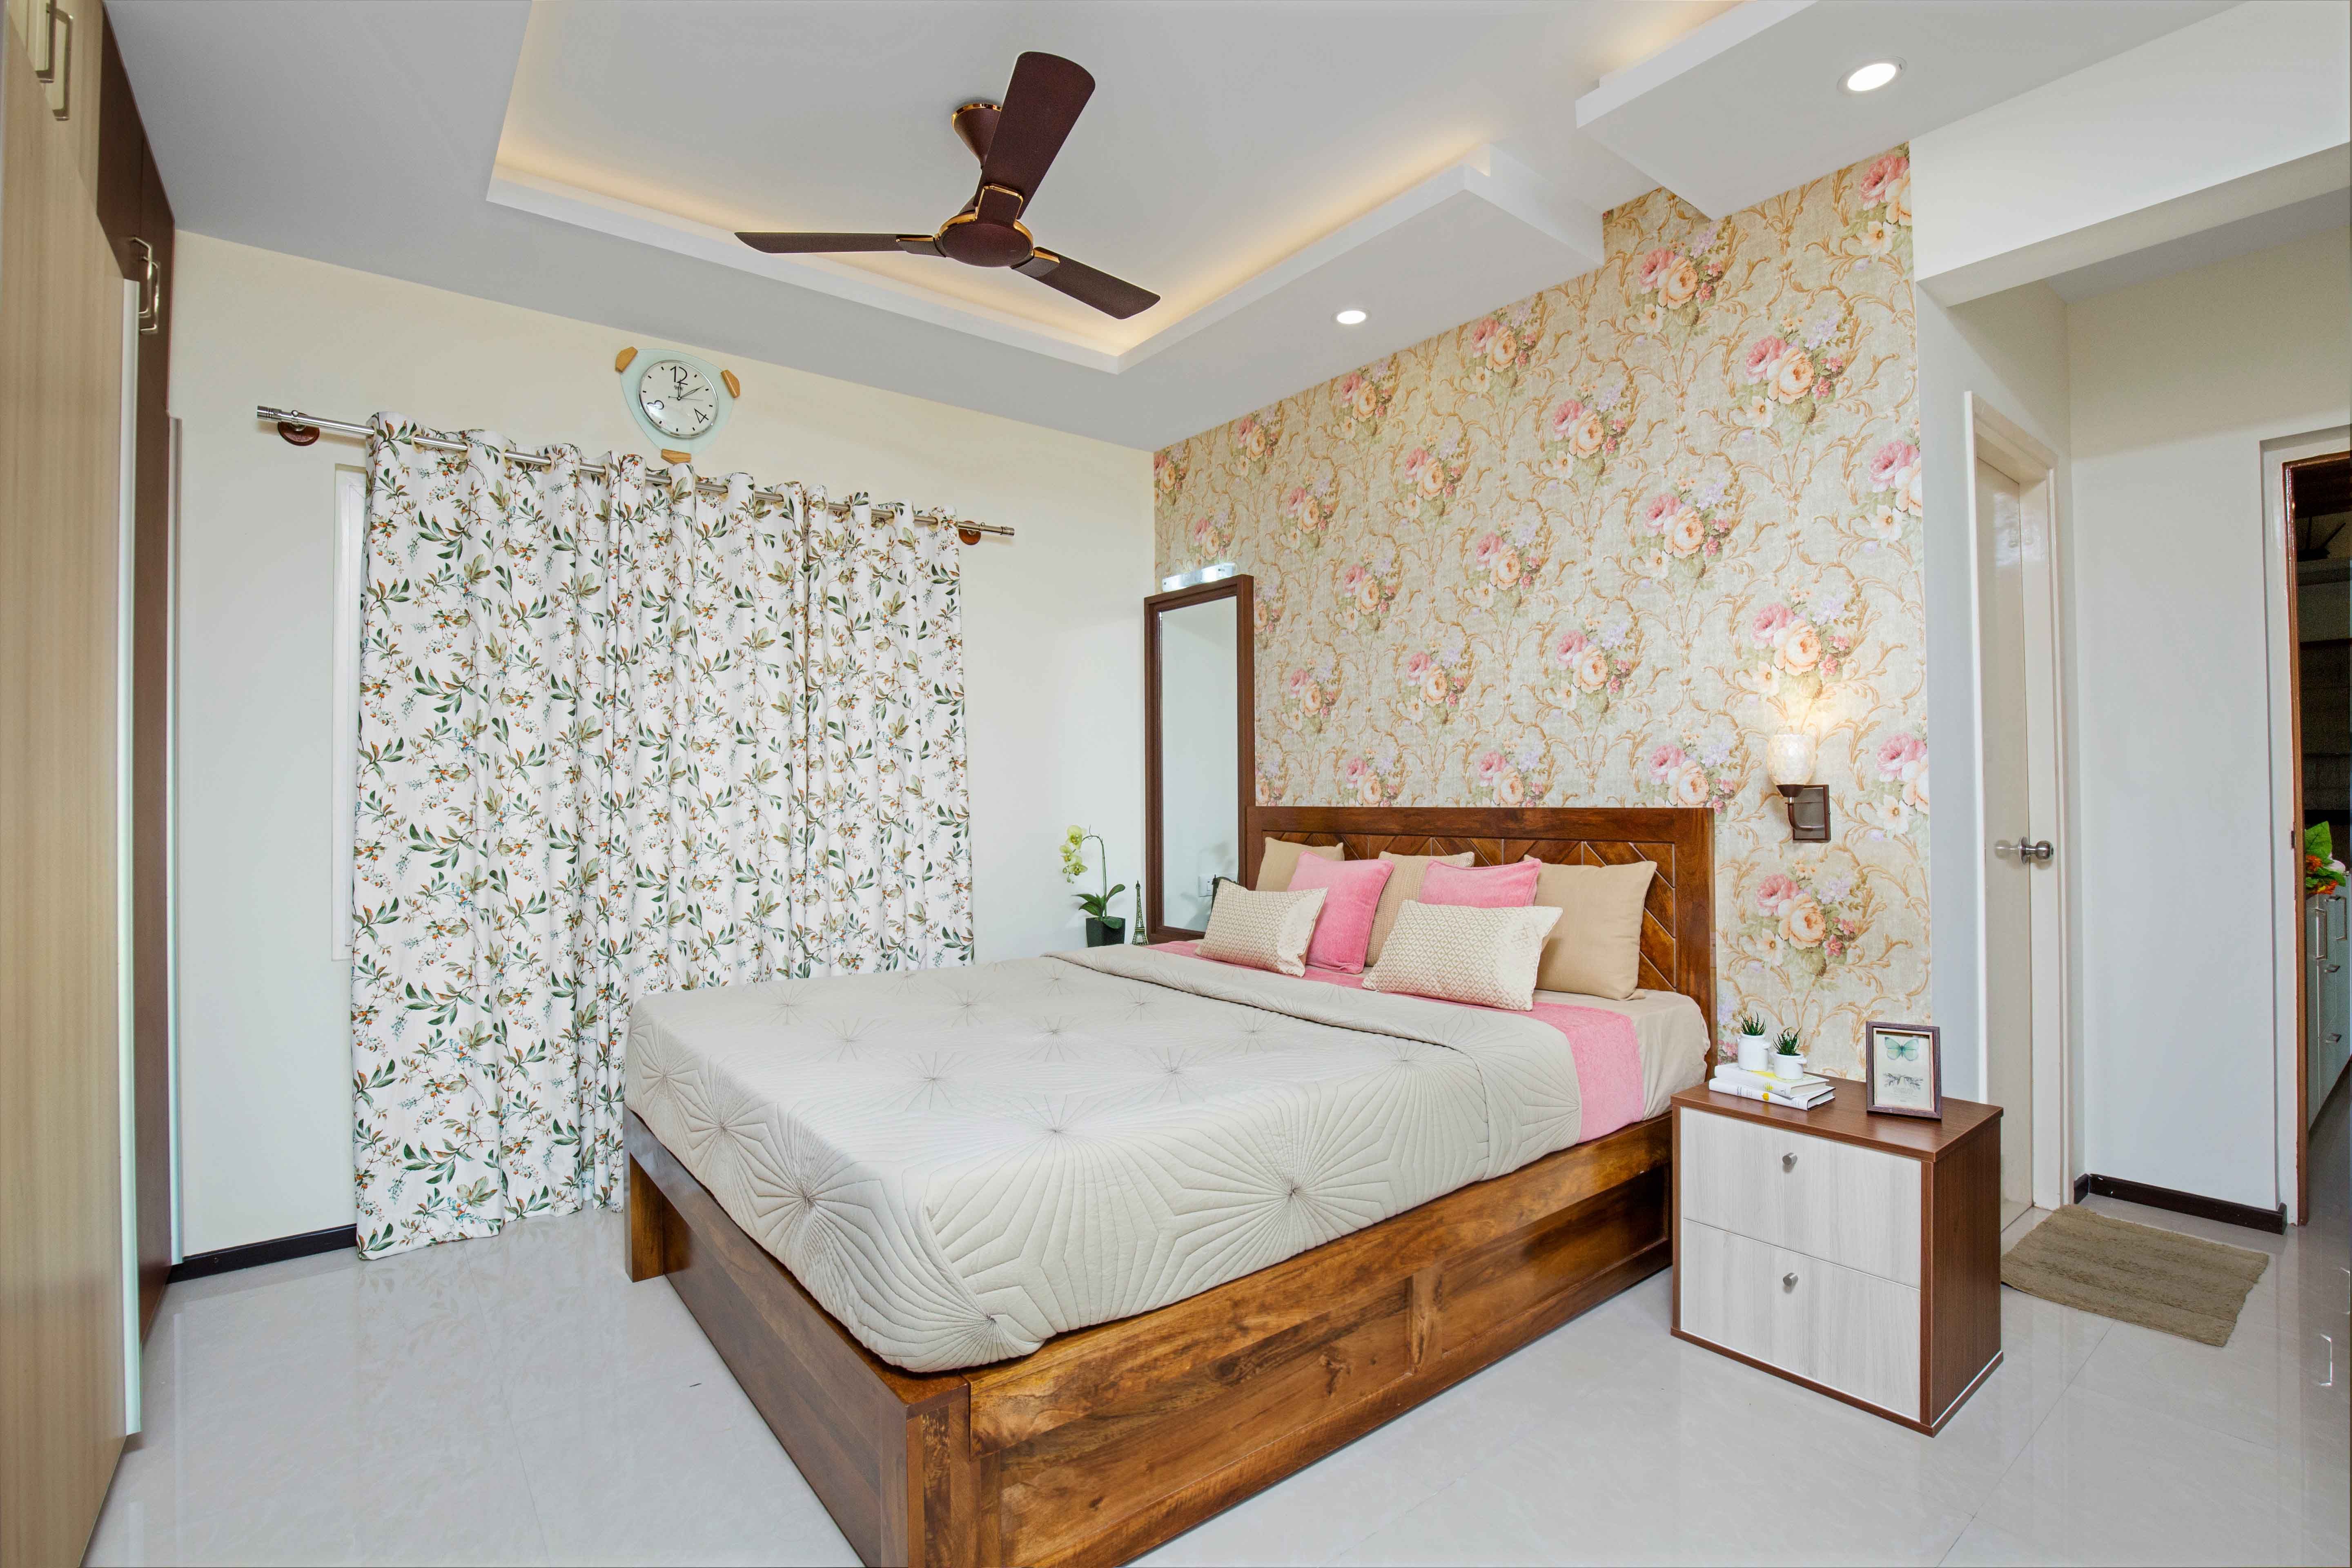 Modern Guest Room Design With Wooden Wardrobe And Floral Wallpaper